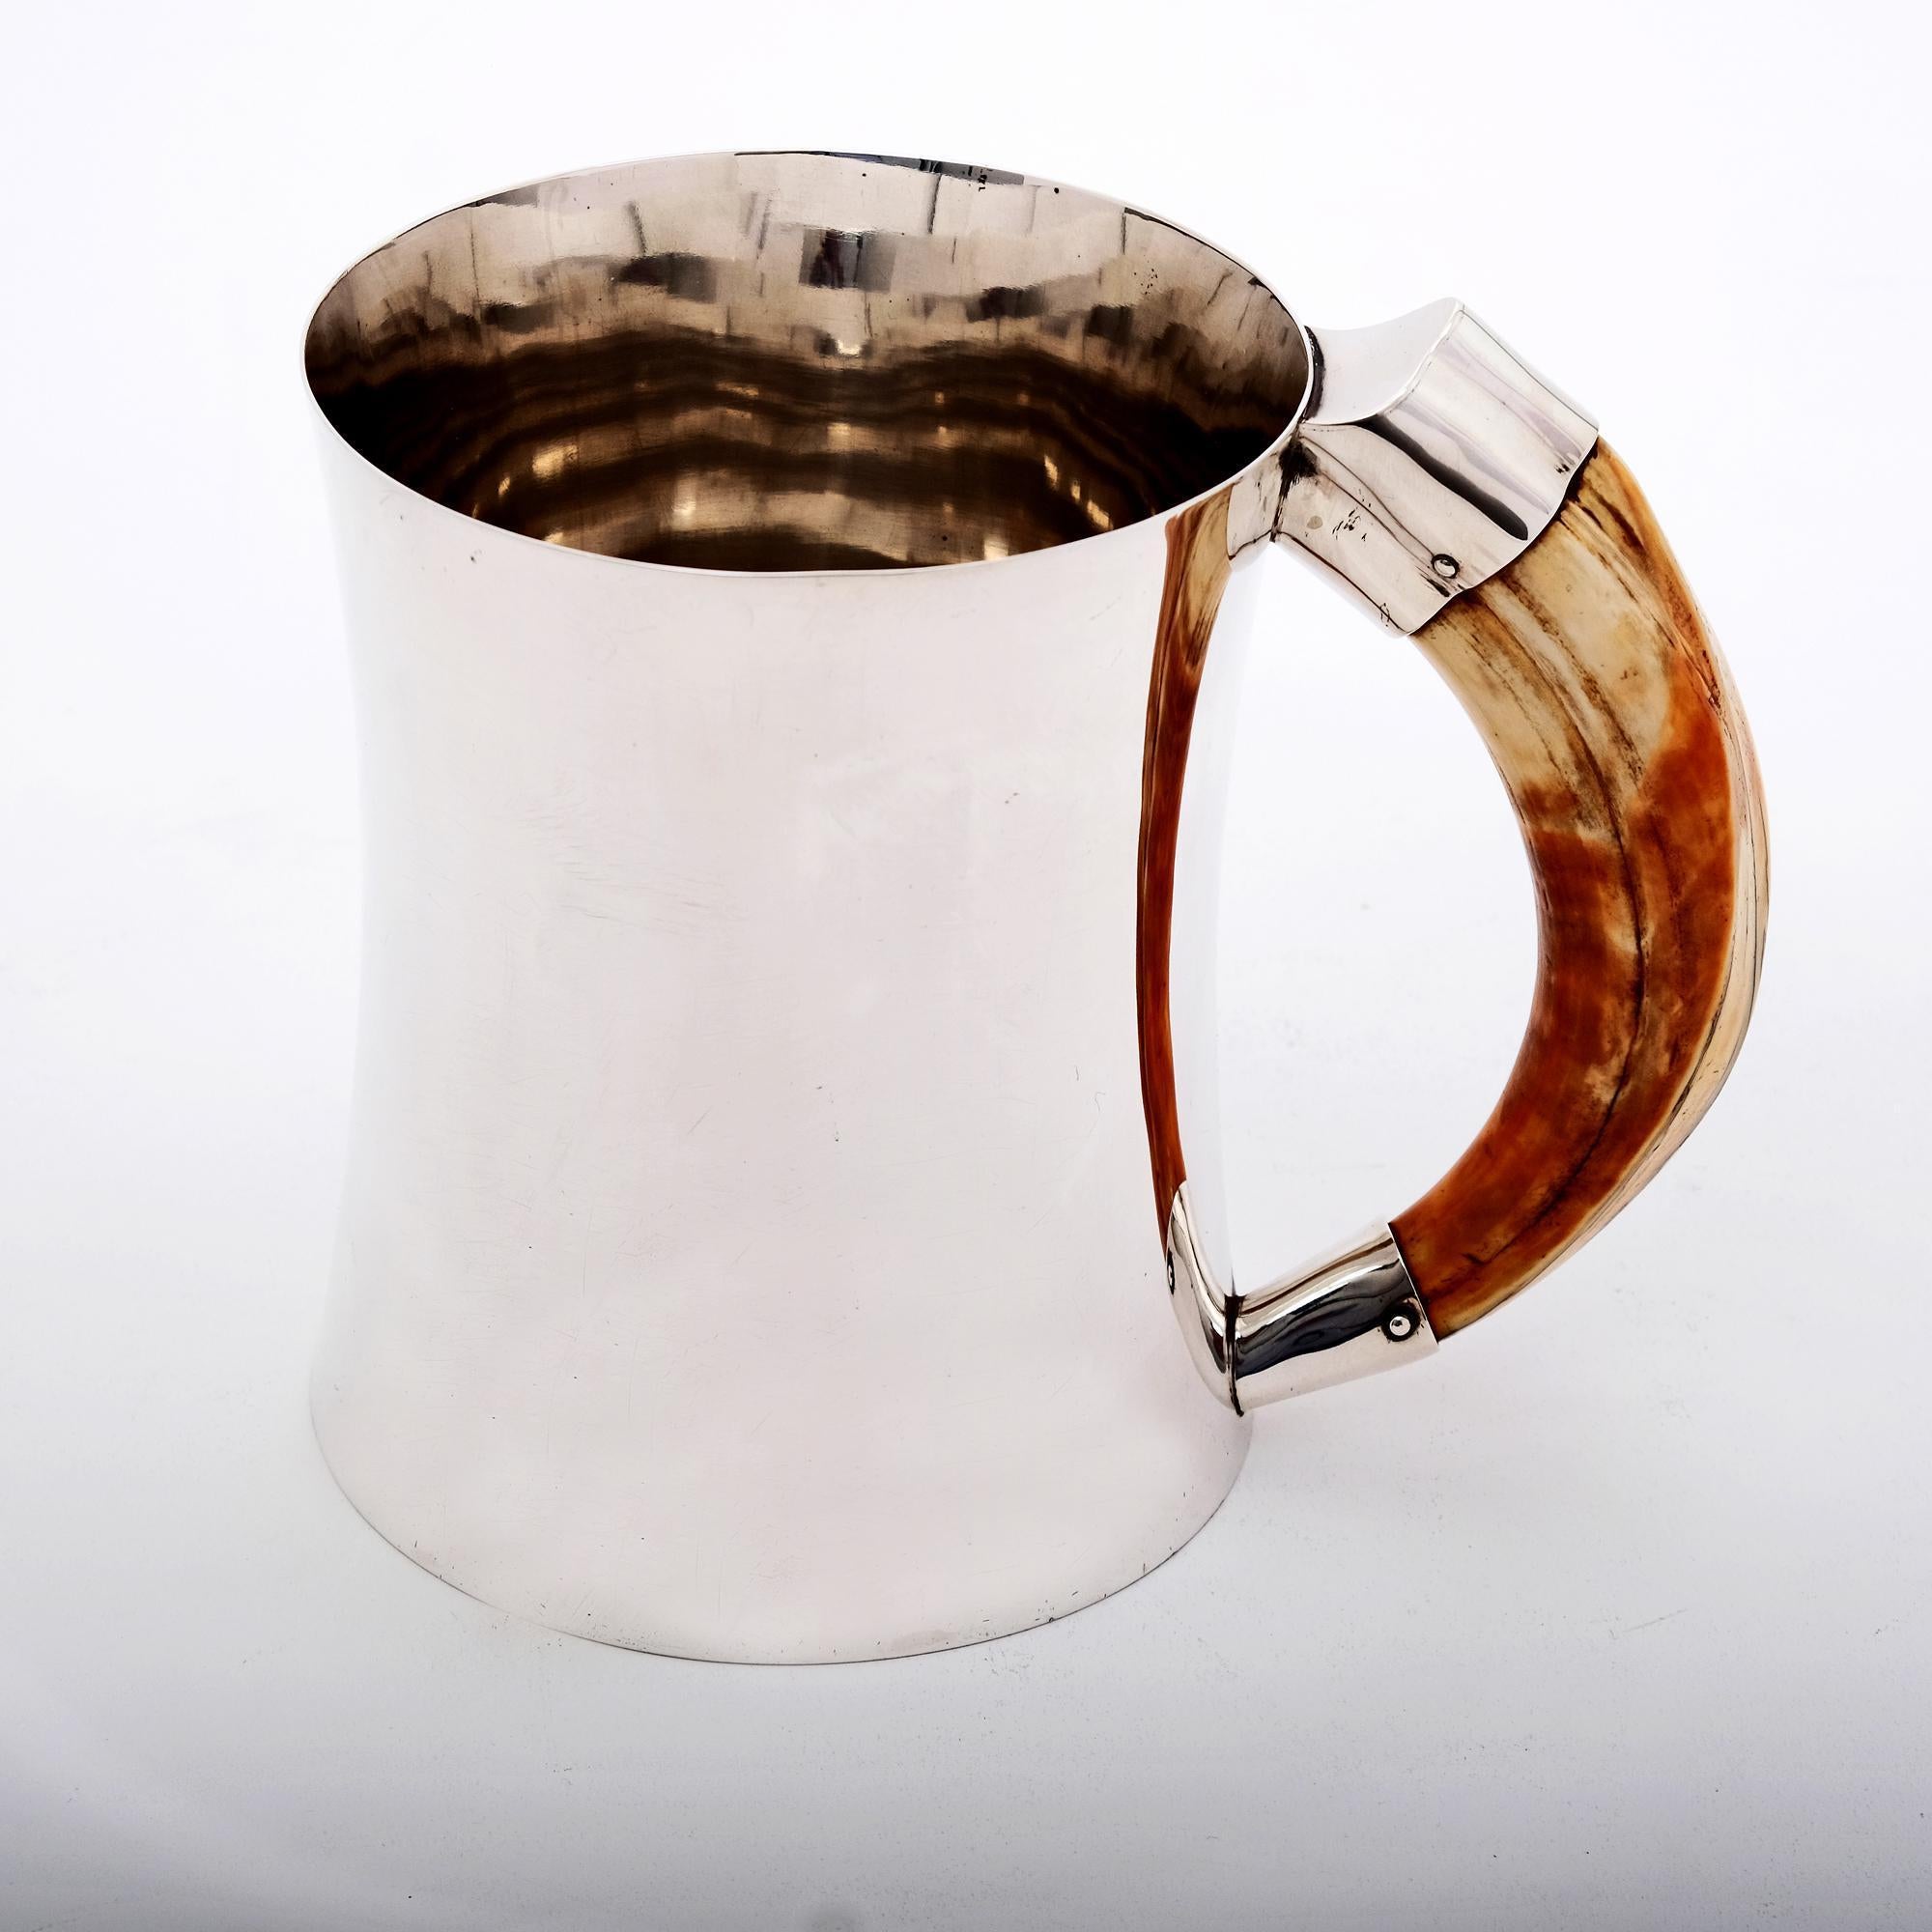 An excellent heavy-gauge silver pint mug with incurved sides and an inset handle probably carved from a wild boar tusk. This stylish piece is very comfortable to hold and drink from.